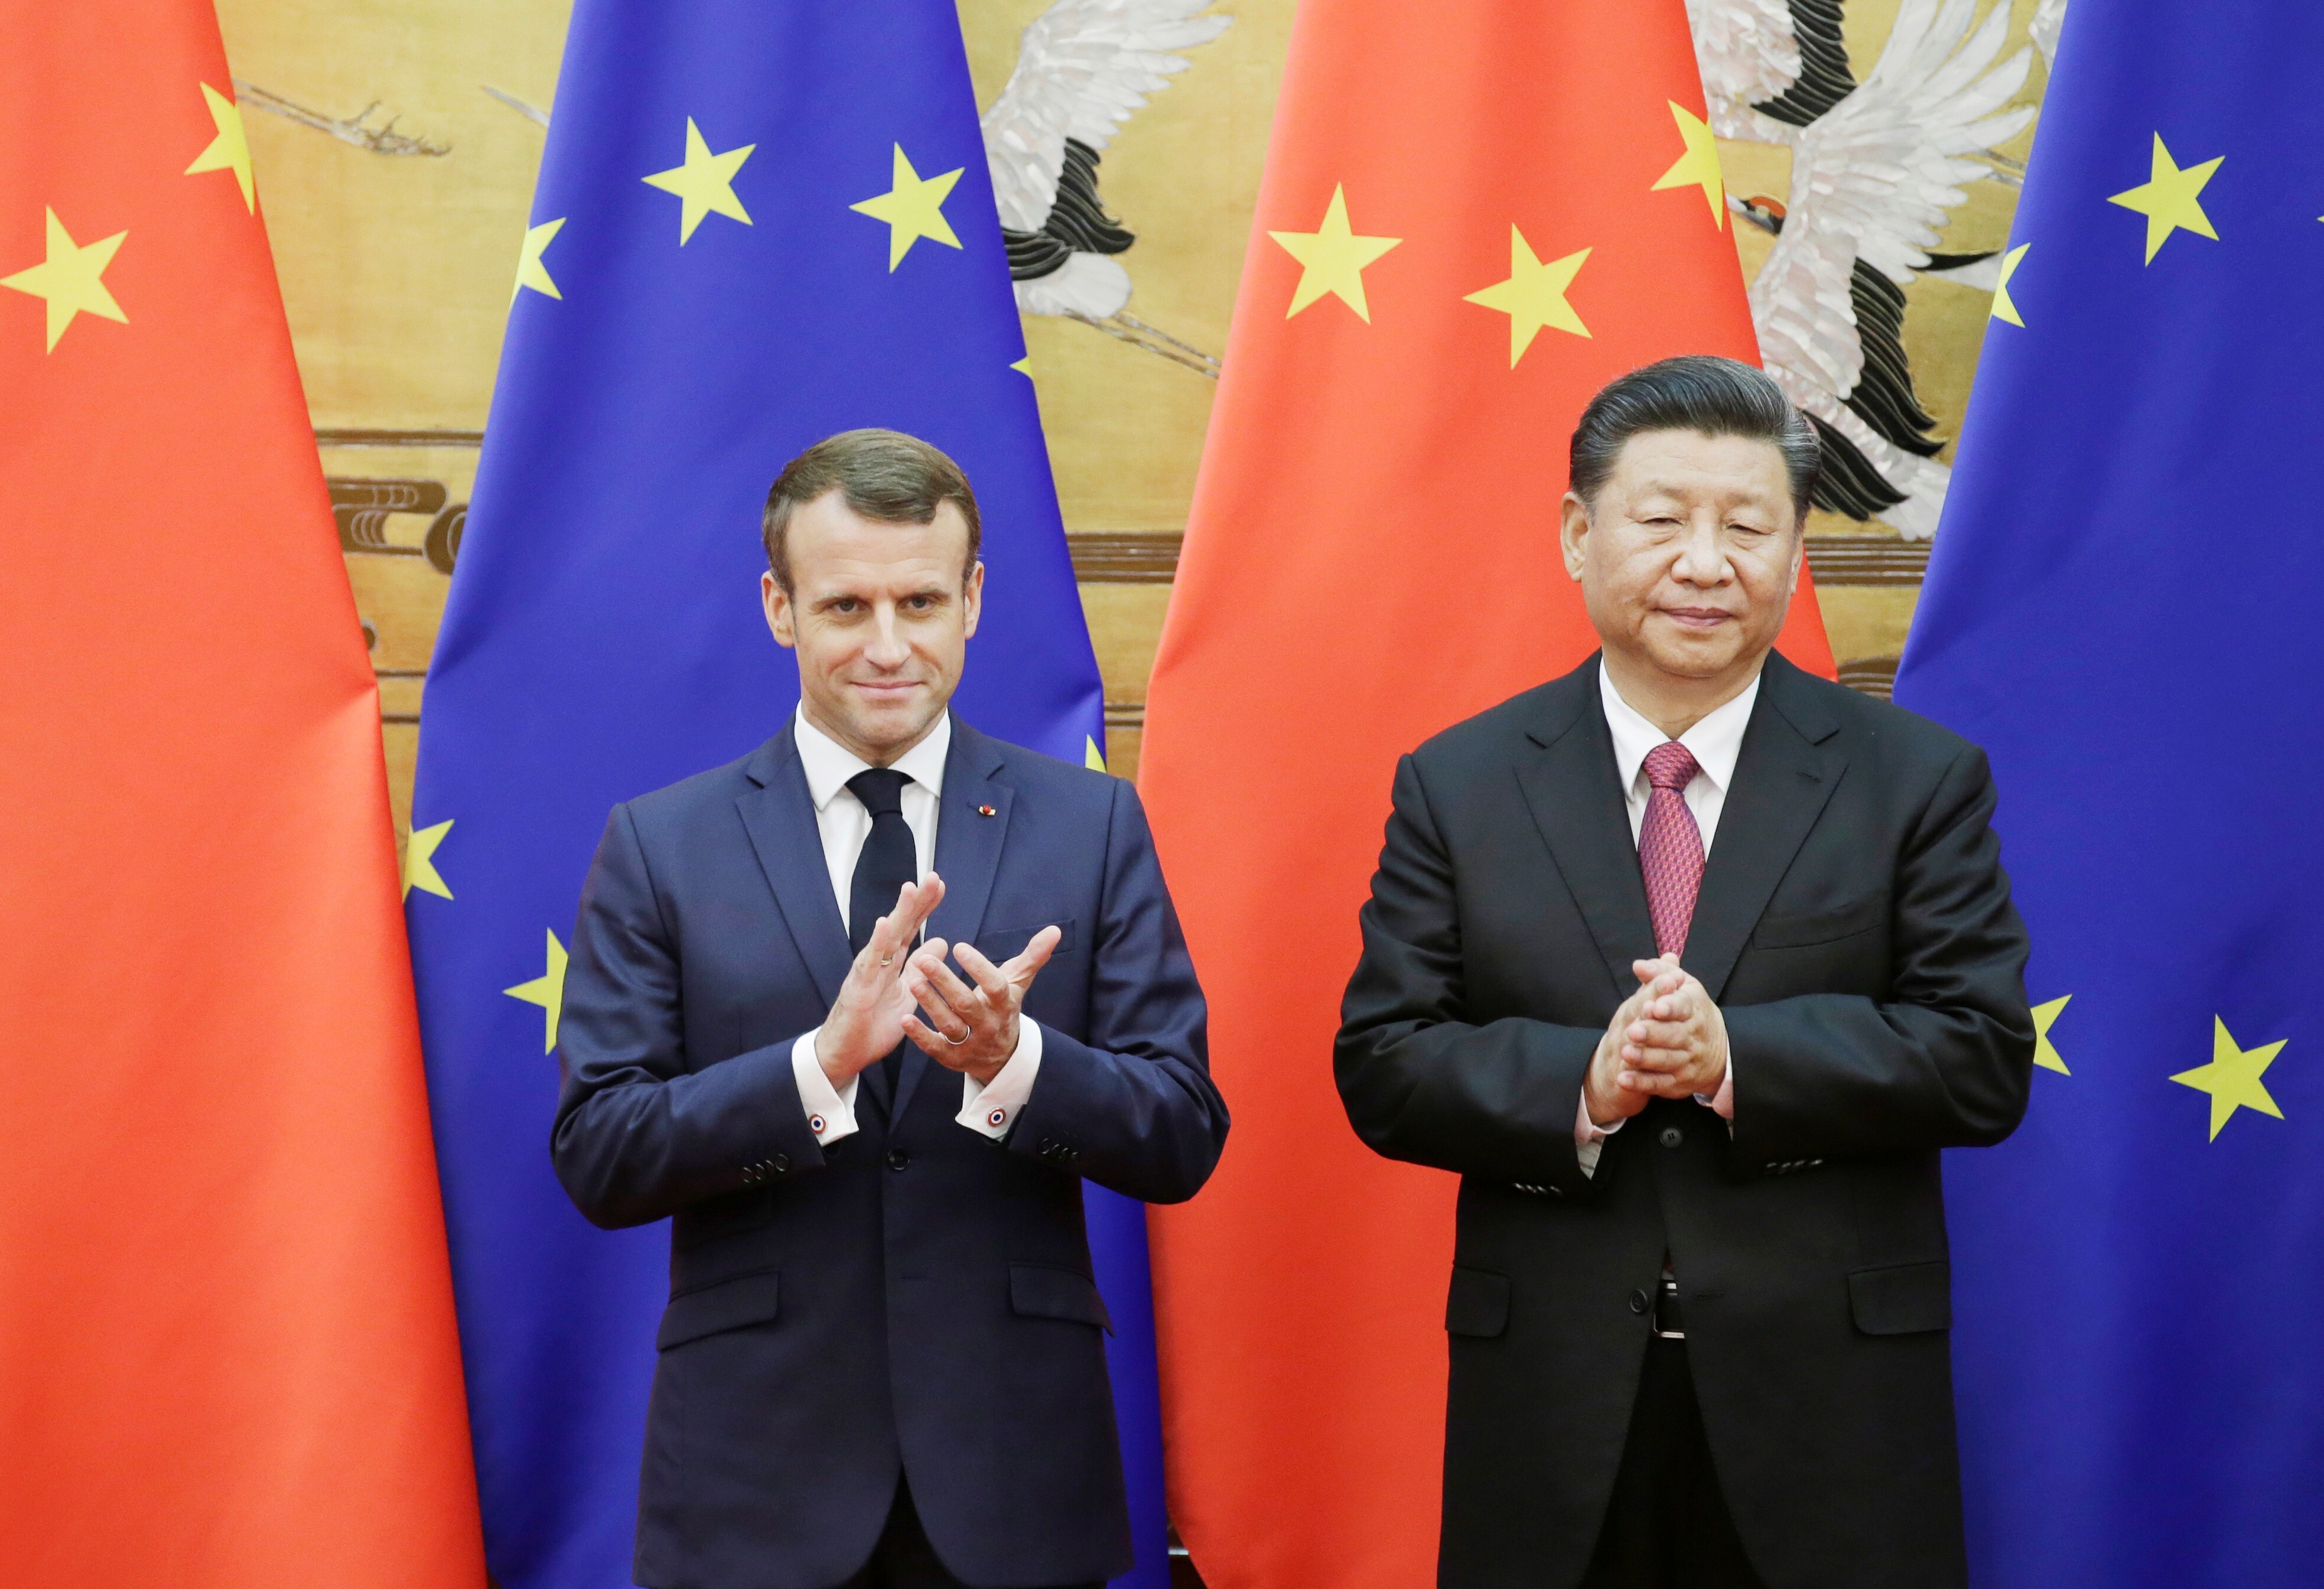 Emmanuel Macron’s participation in the call with Xi Jinping has yet to be confirmed. Photo: Reuters